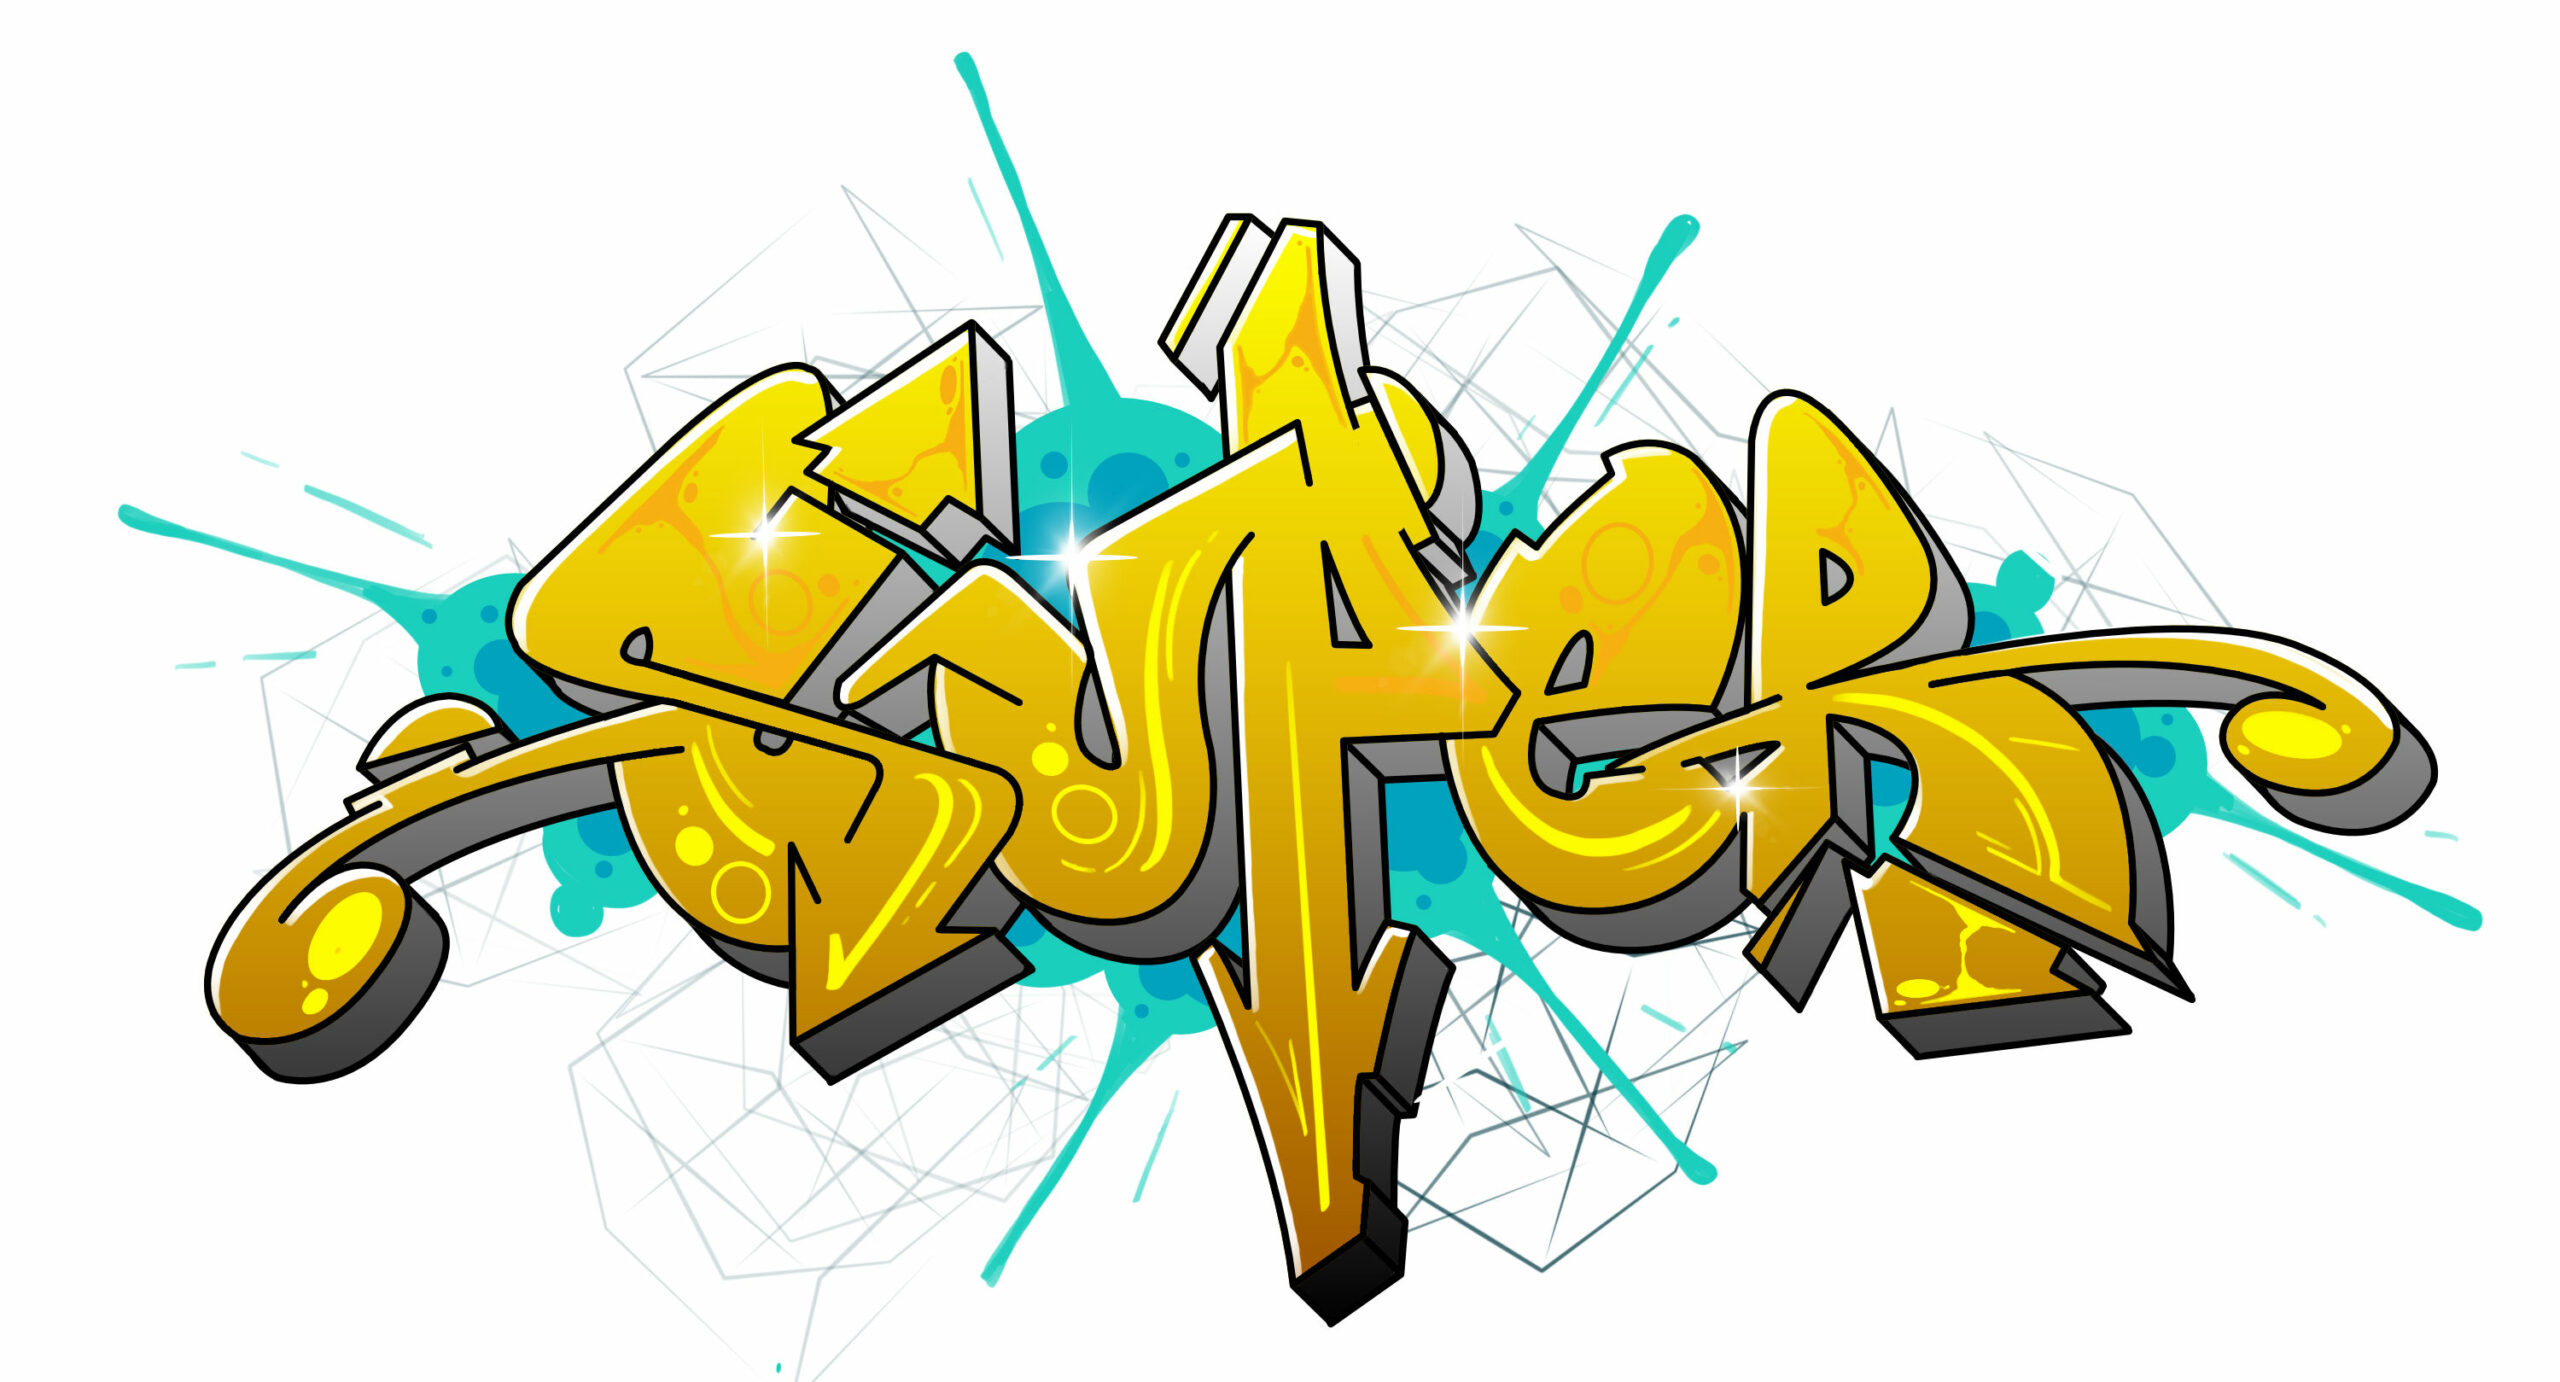 How to Draw “Super” in Graffiti in 17 Steps